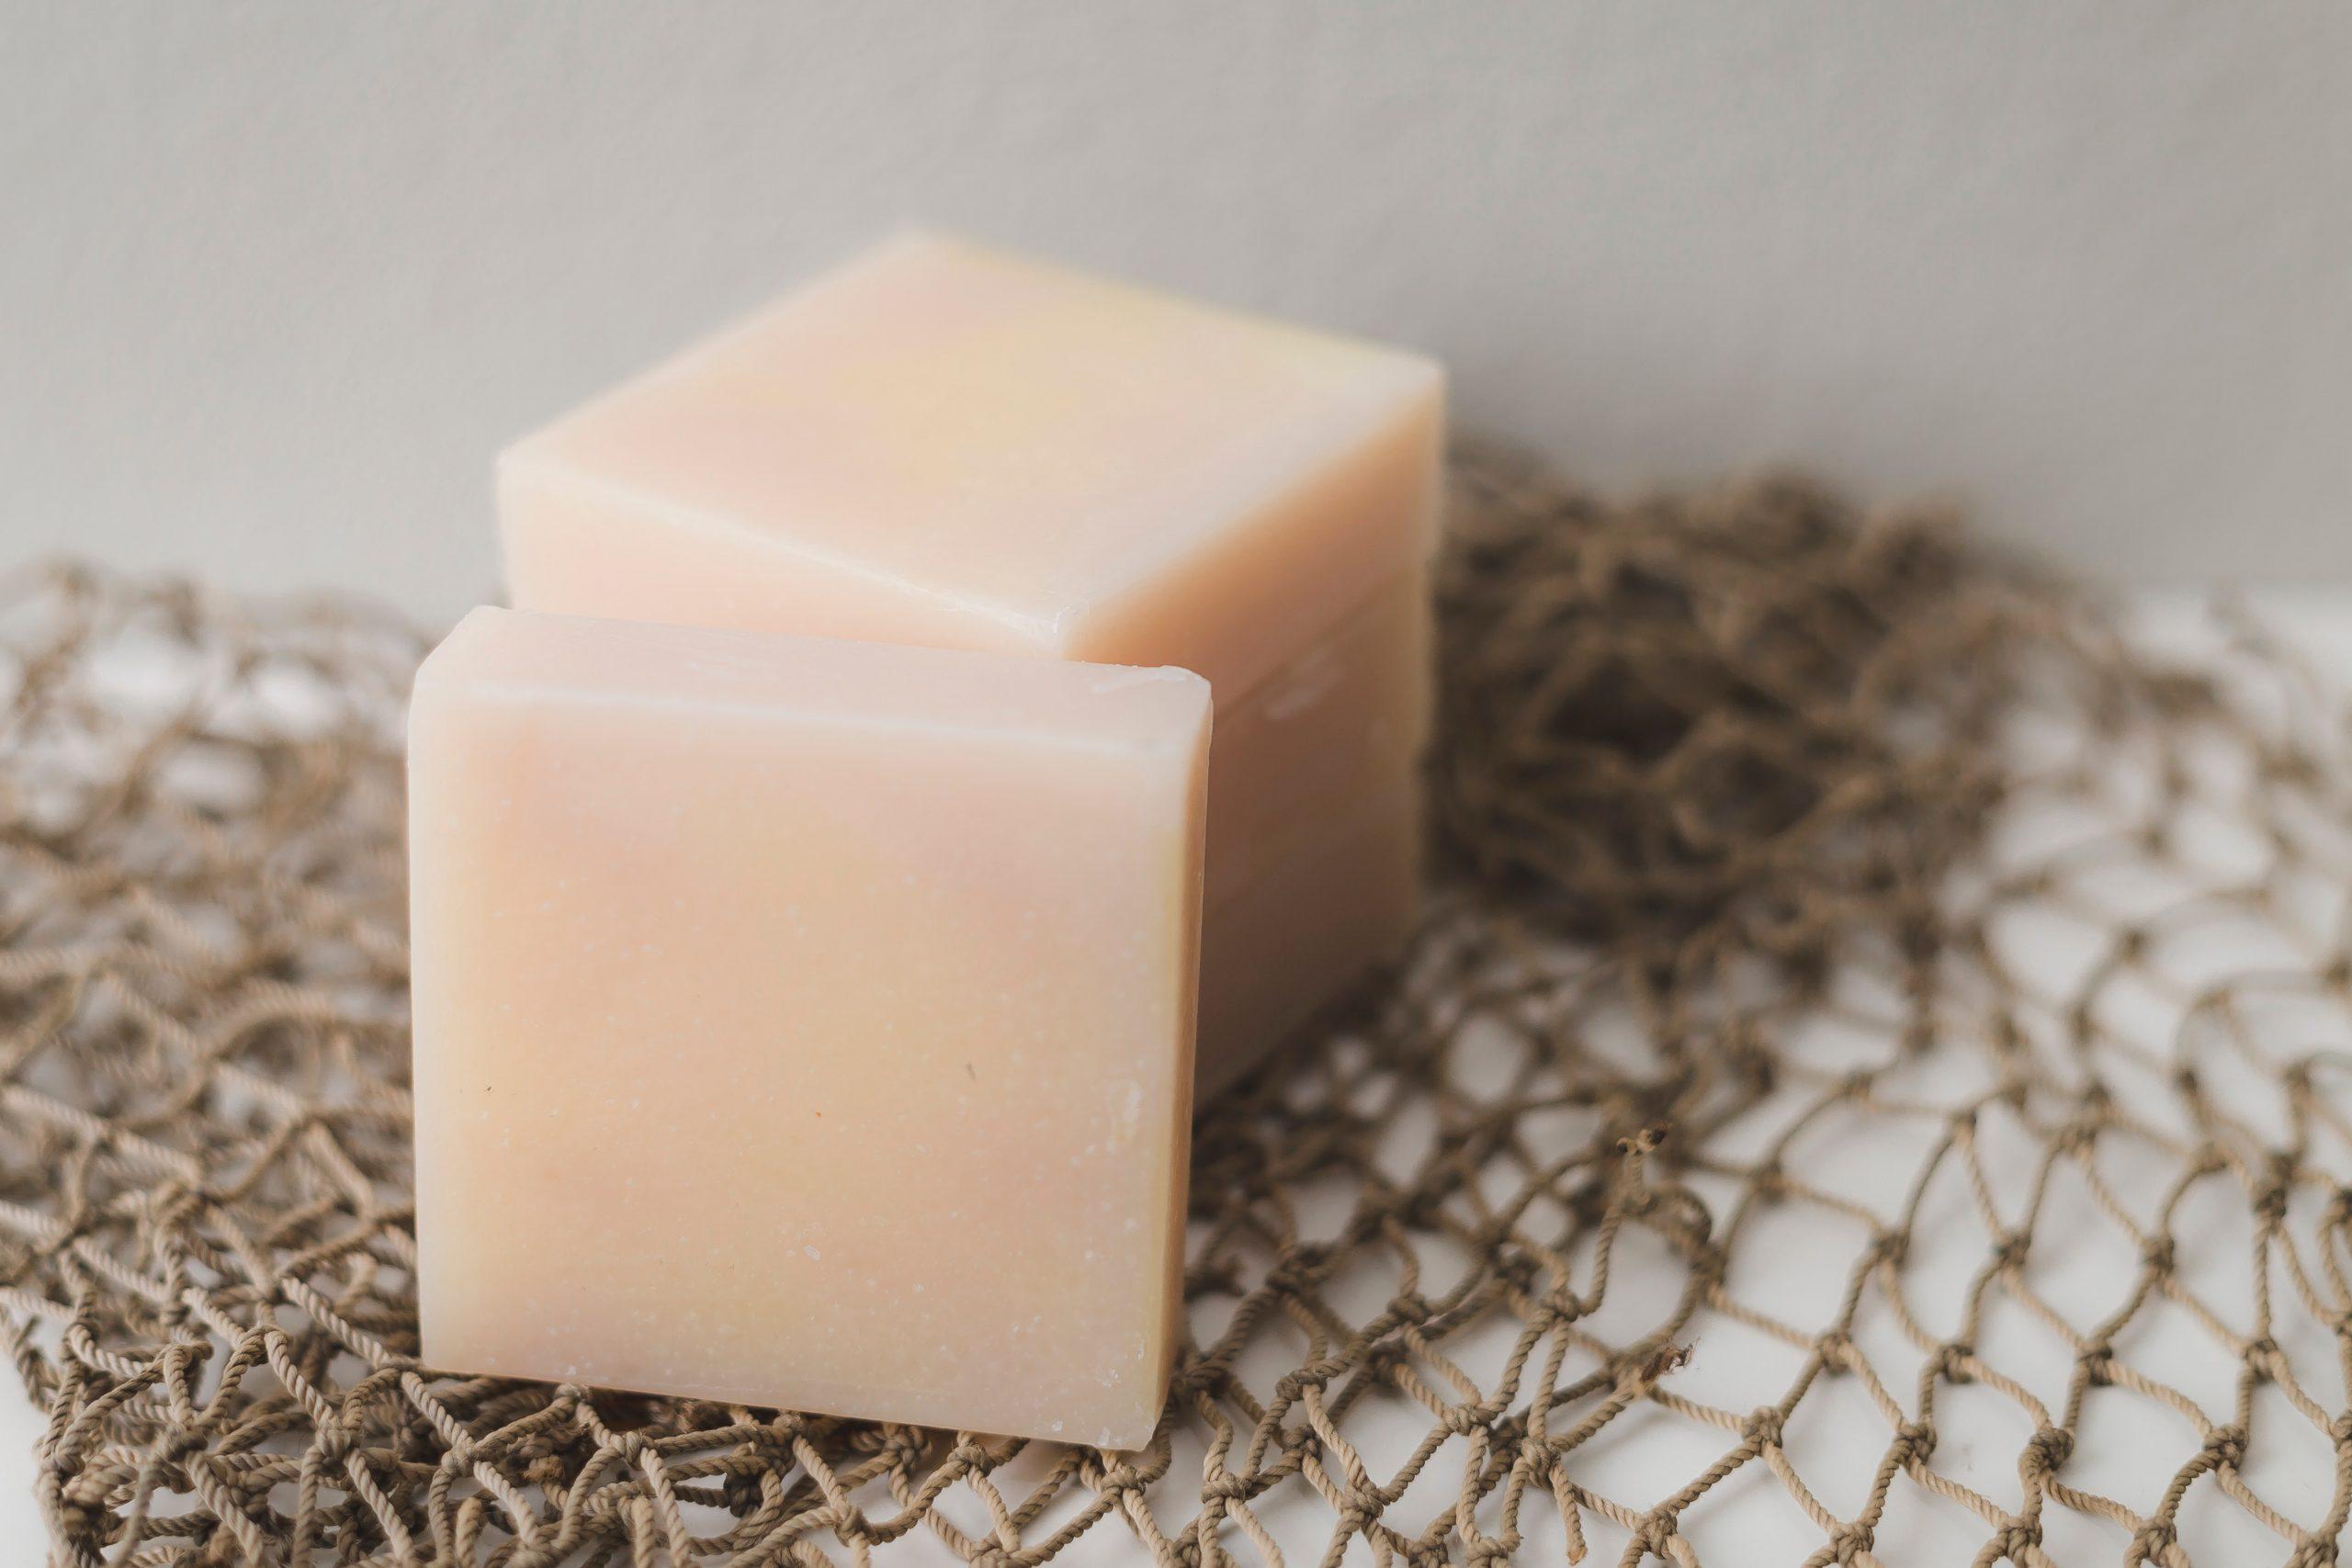 Why Hibiscus Shampoo Bars Are a Sustainable Hair Care Option?